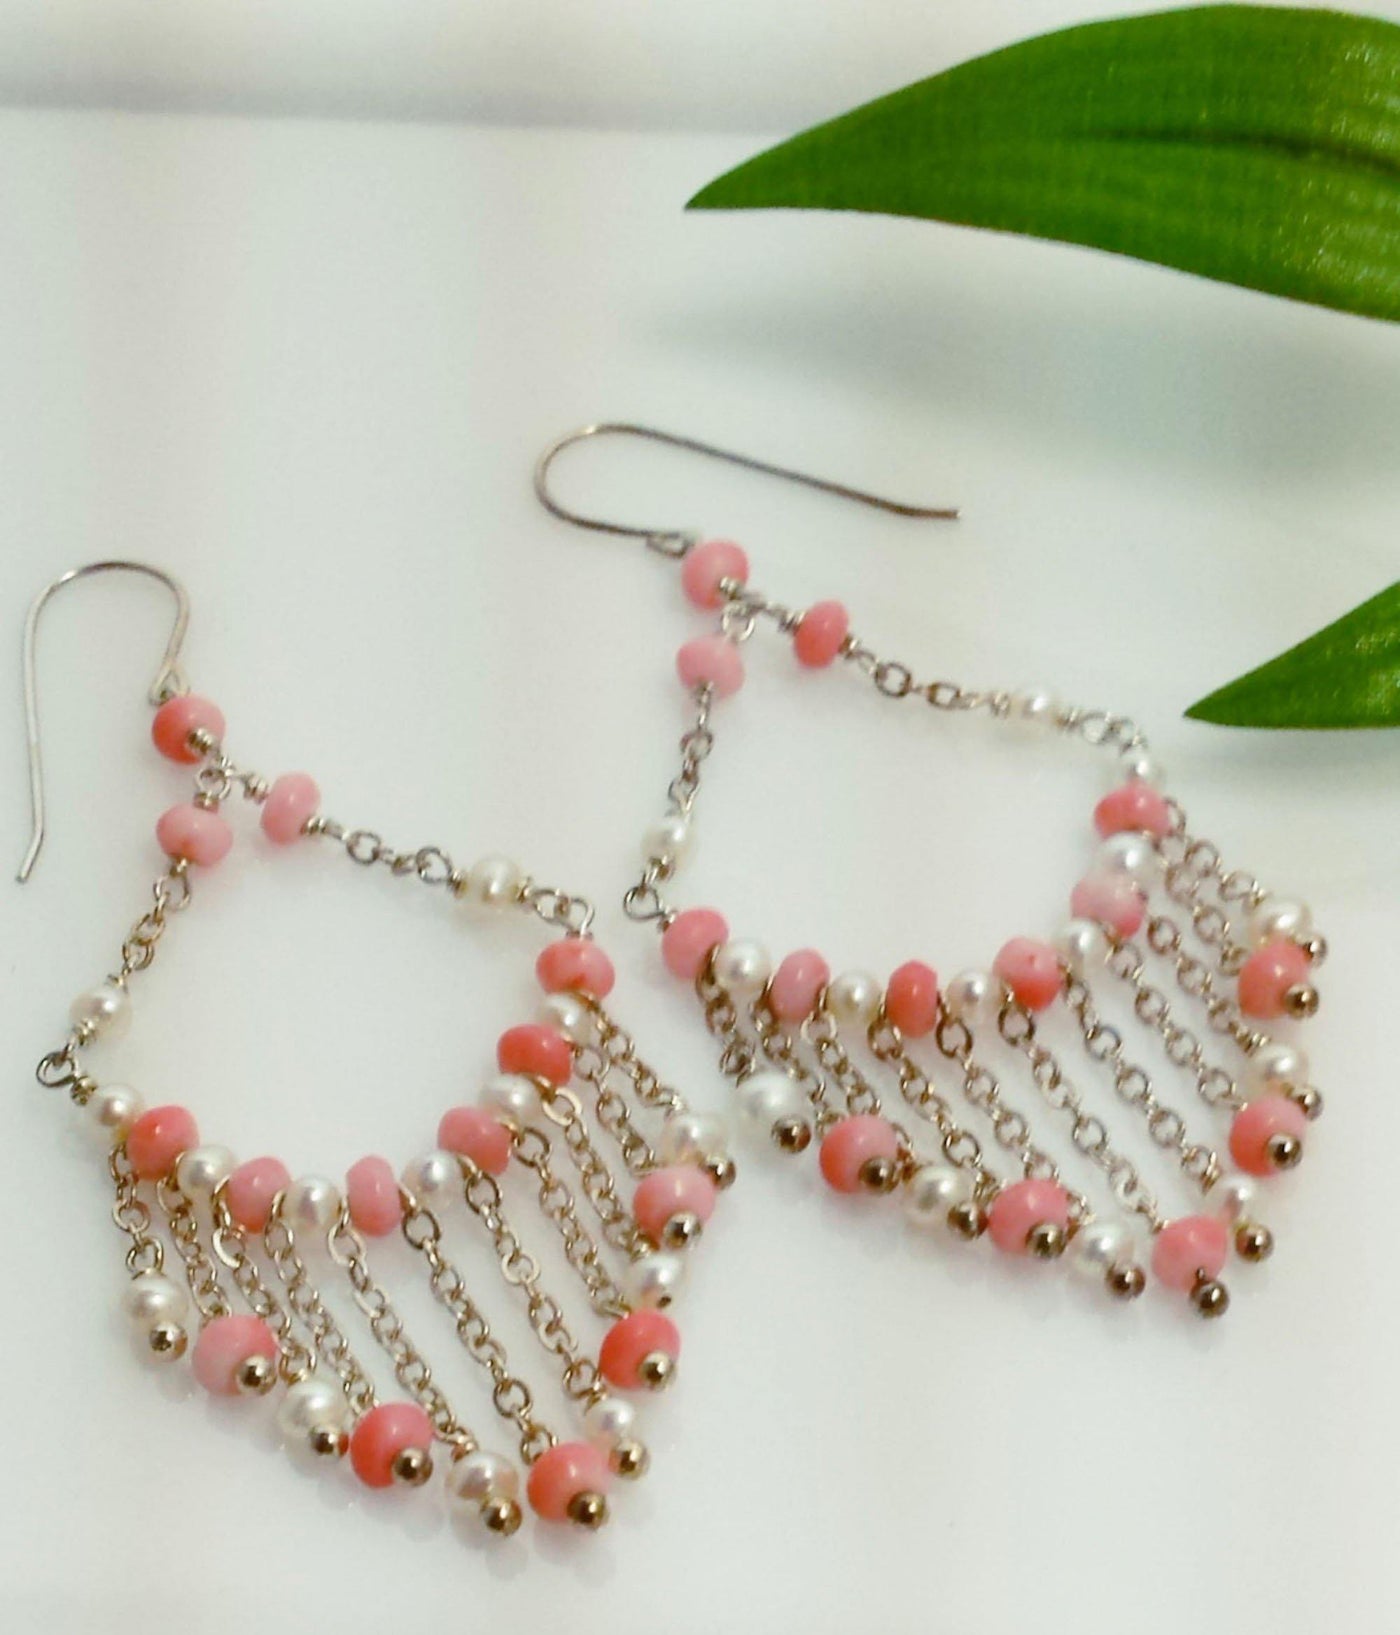 Stylish silver and pearl chandelier earrings - LB Designs